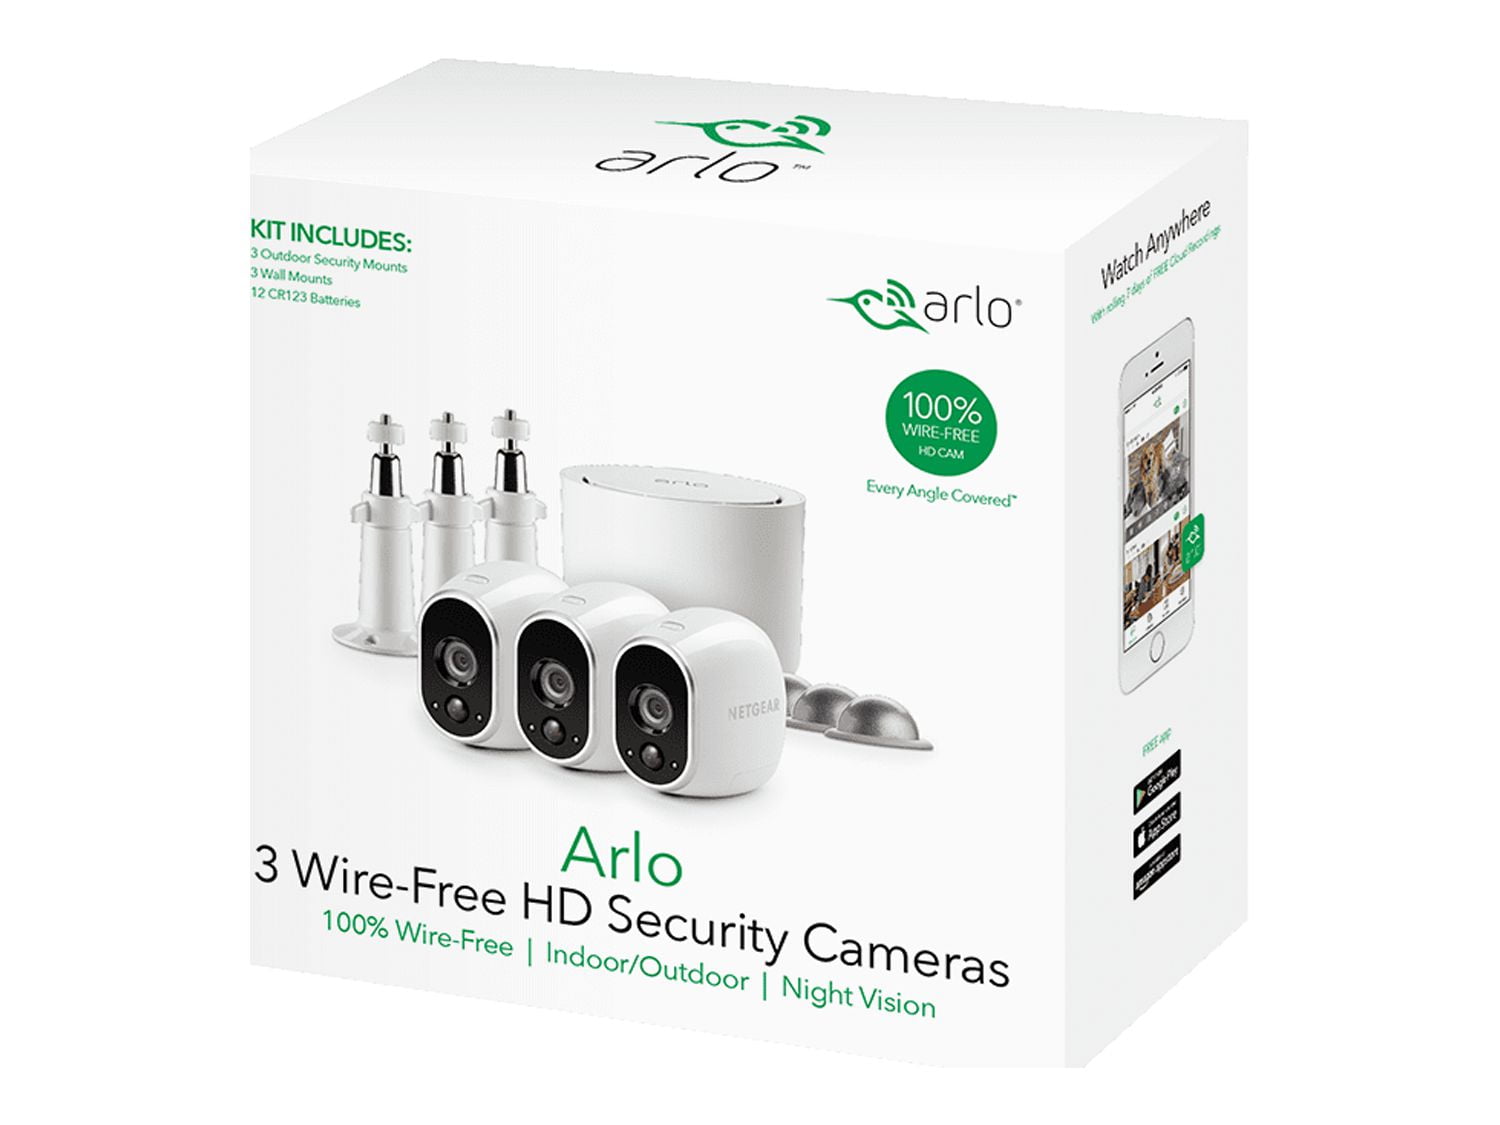 Arlo 720P HD Security Camera System VMS3430 - 4 Wire-Free Battery Cameras  with Indoor/Outdoor, Night Vision, Motion Detection 